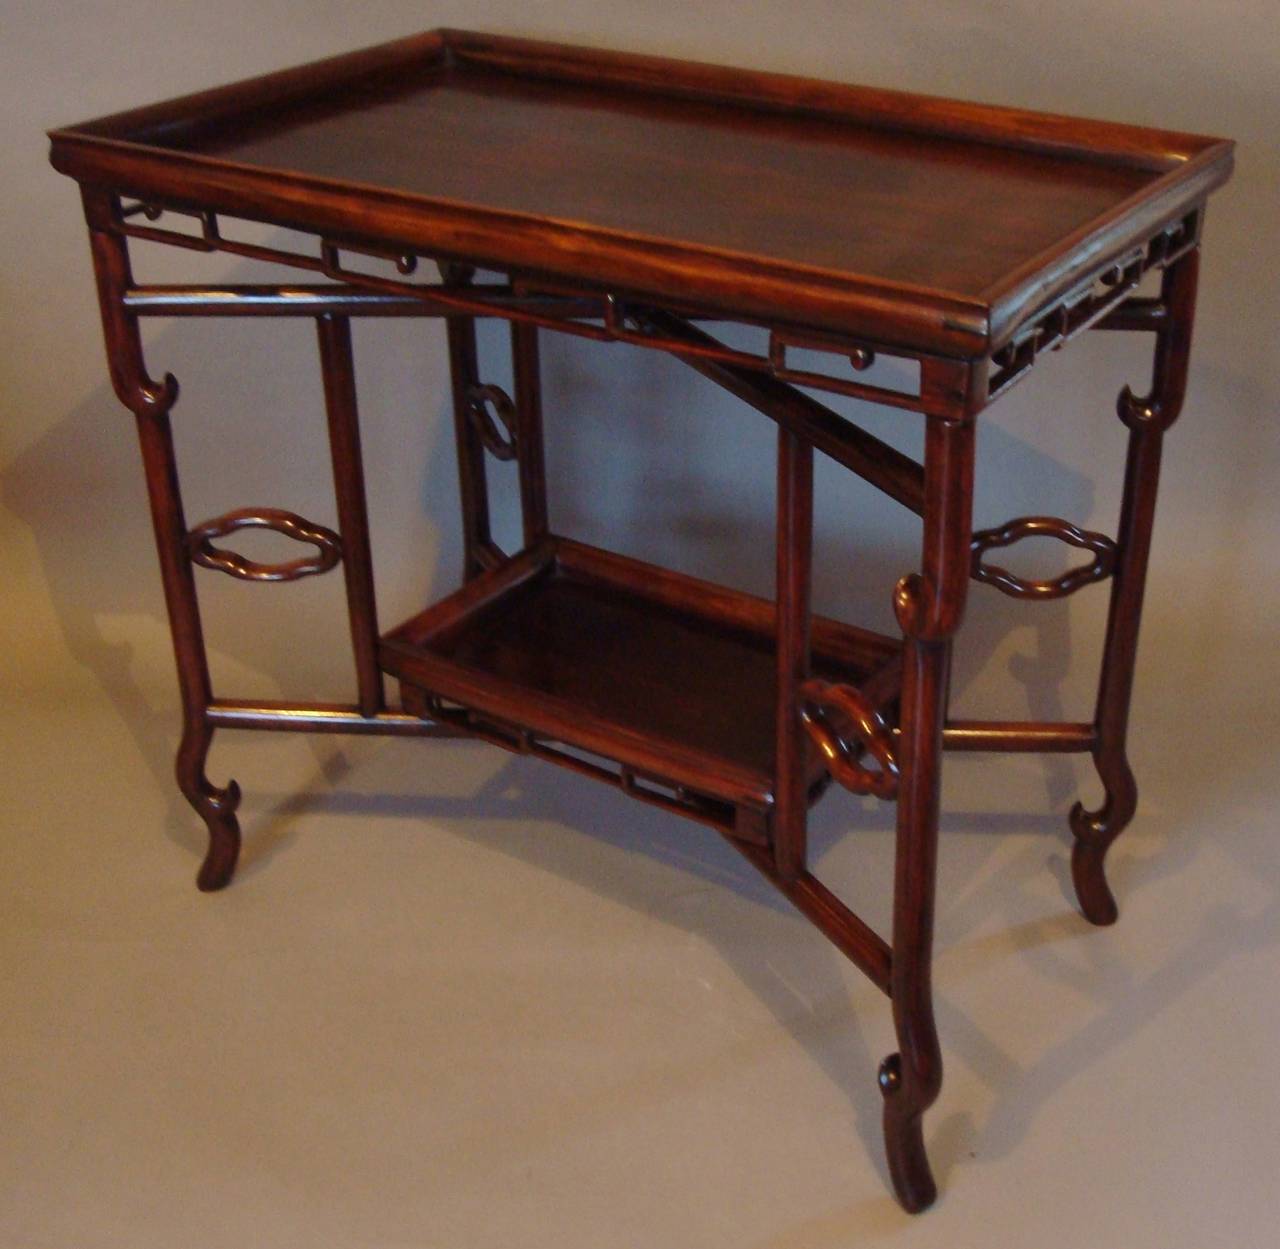 C19th Chinese Hongmu tray table; the removable rectangular tray top with a raised moulded gallery above an 'x' shaped base with scrolled legs, supporting a lower removable tray with a raised moulded gallery.  The two trays remove and the base is